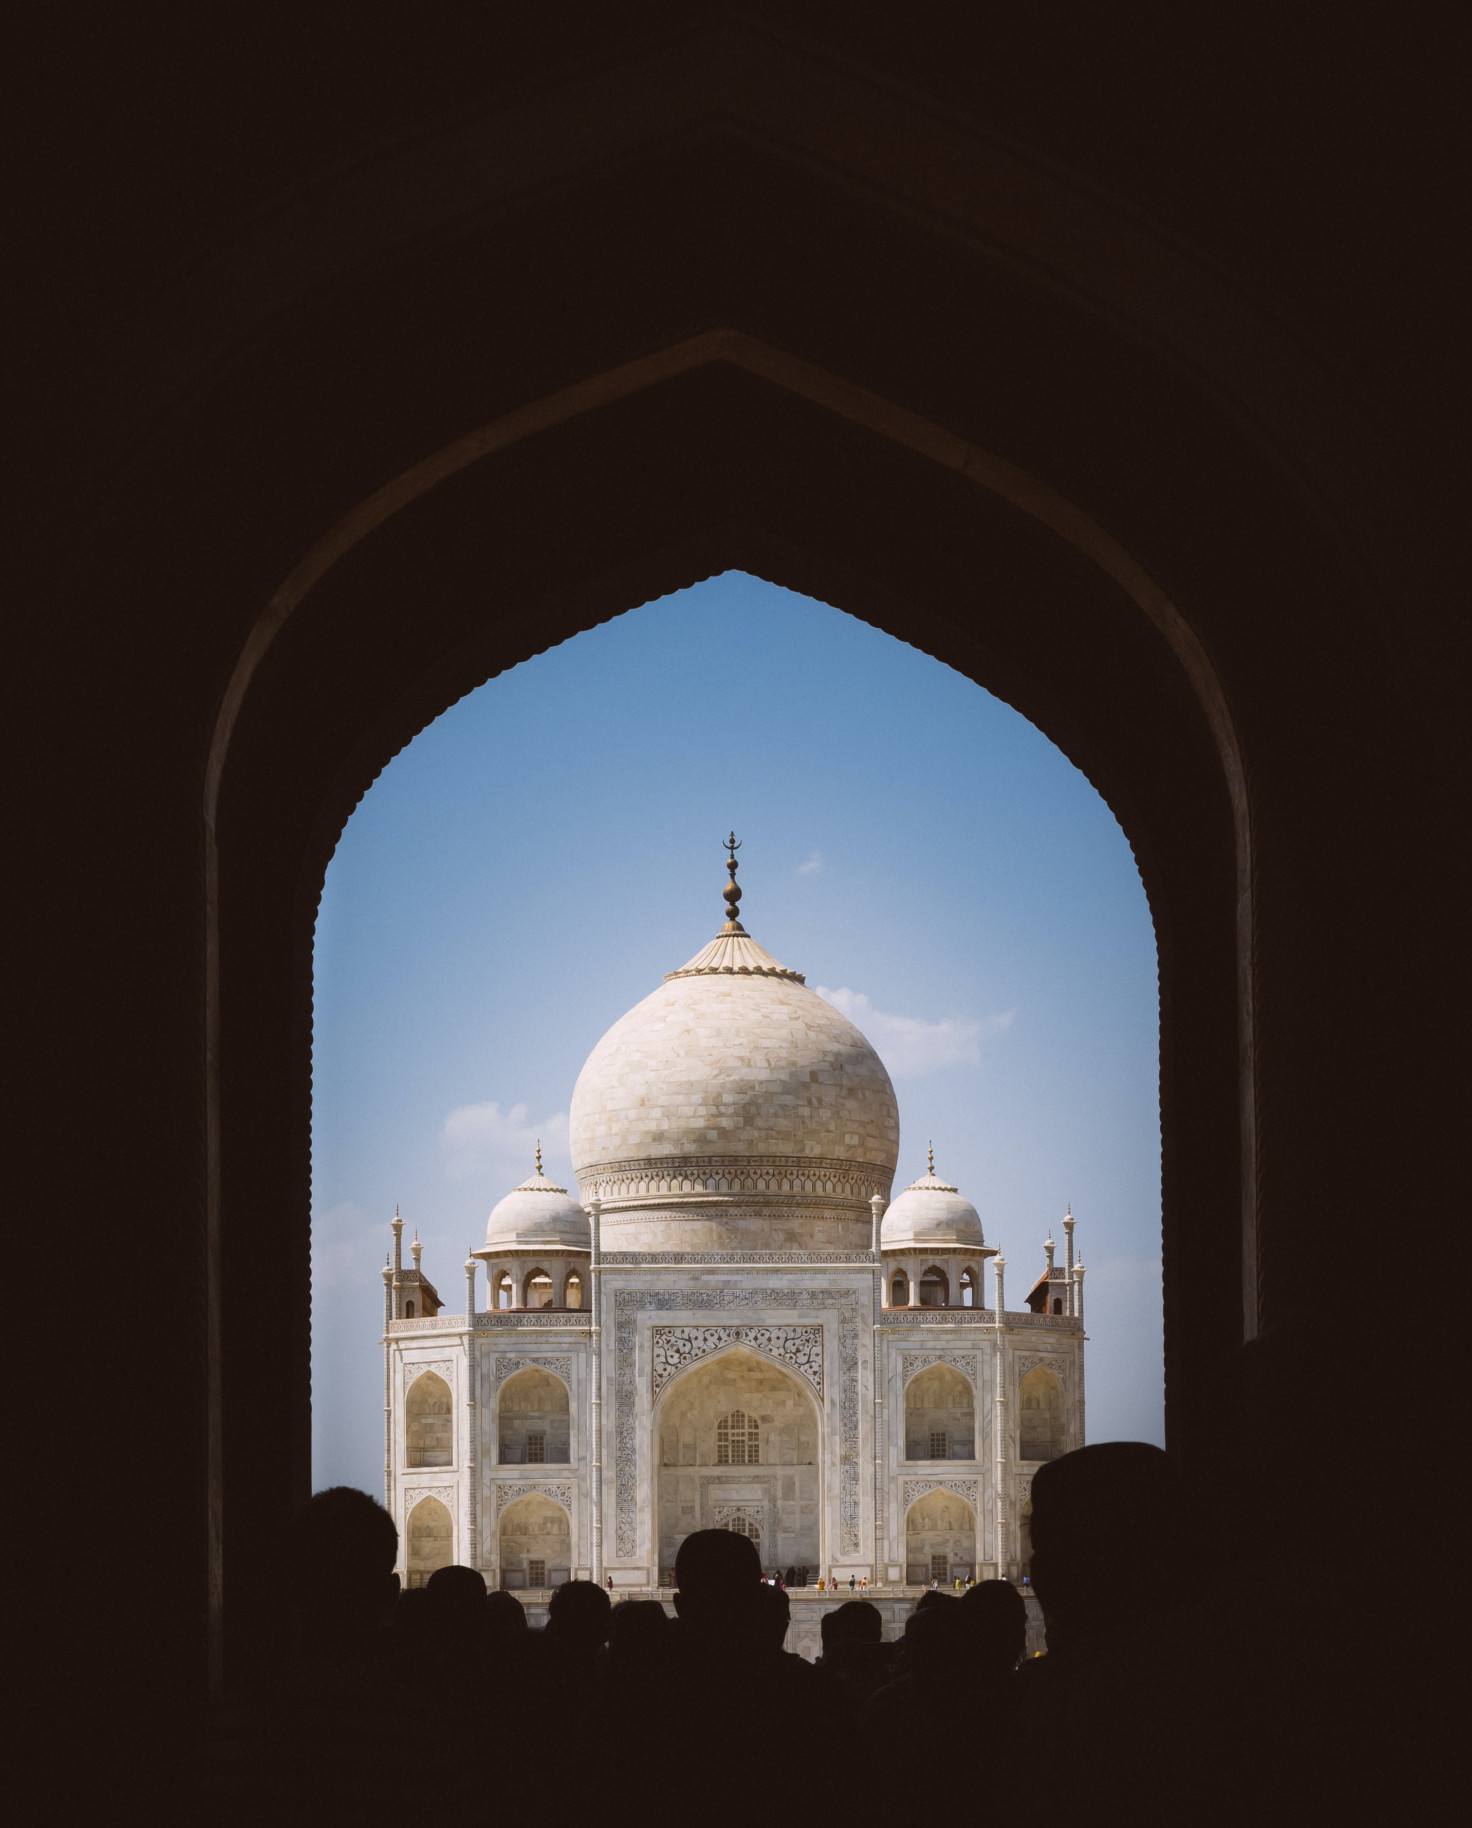 Agra, India travel guide. 